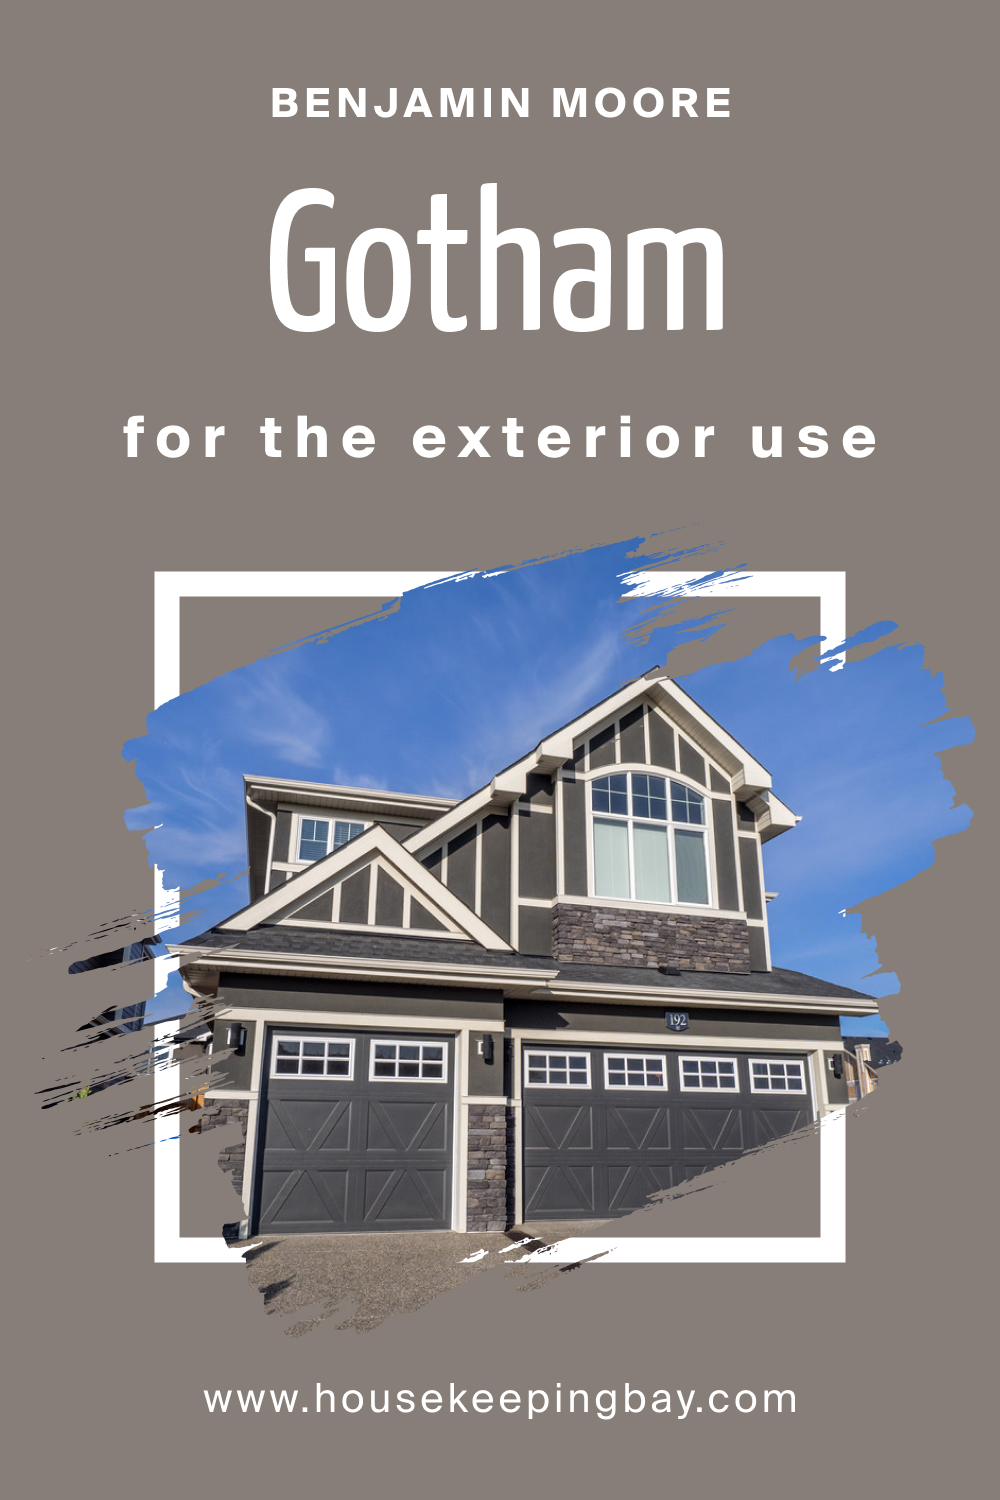 How to Use Gotham CSP-385 for an Exterior?